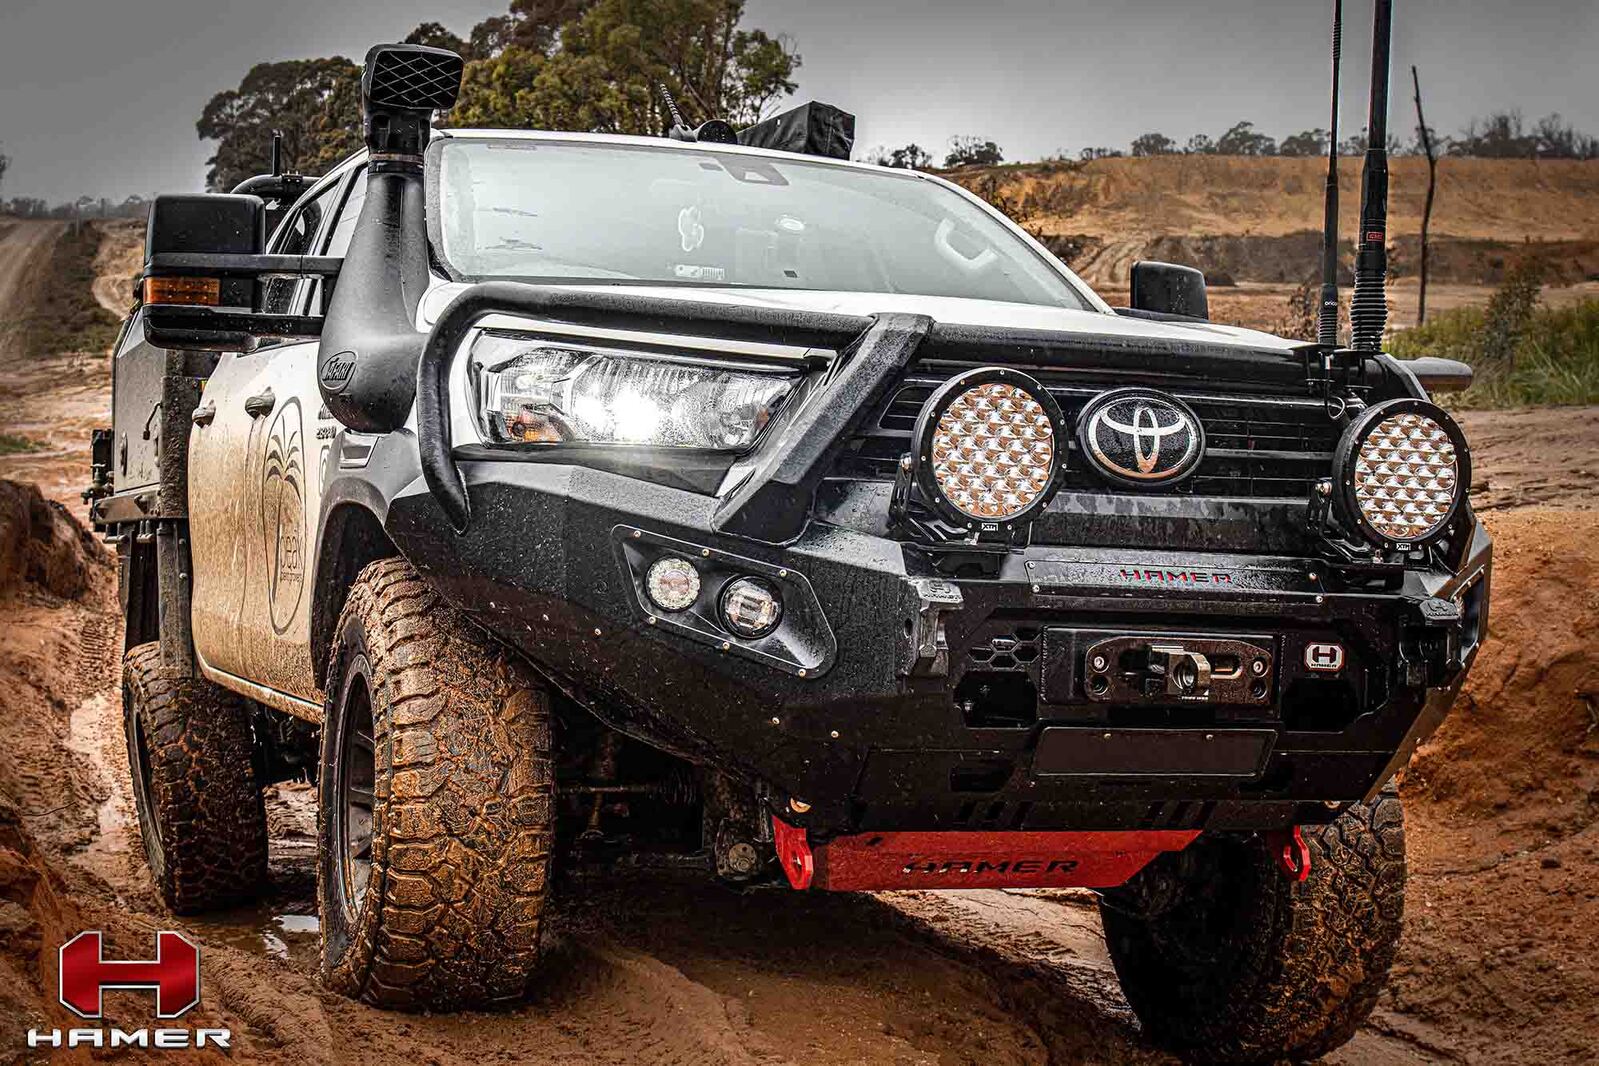 HAMER KING SERIES PLUS BULL BAR TO SUIT TOYOTA HILUX W/FENDERS (2020-ON)